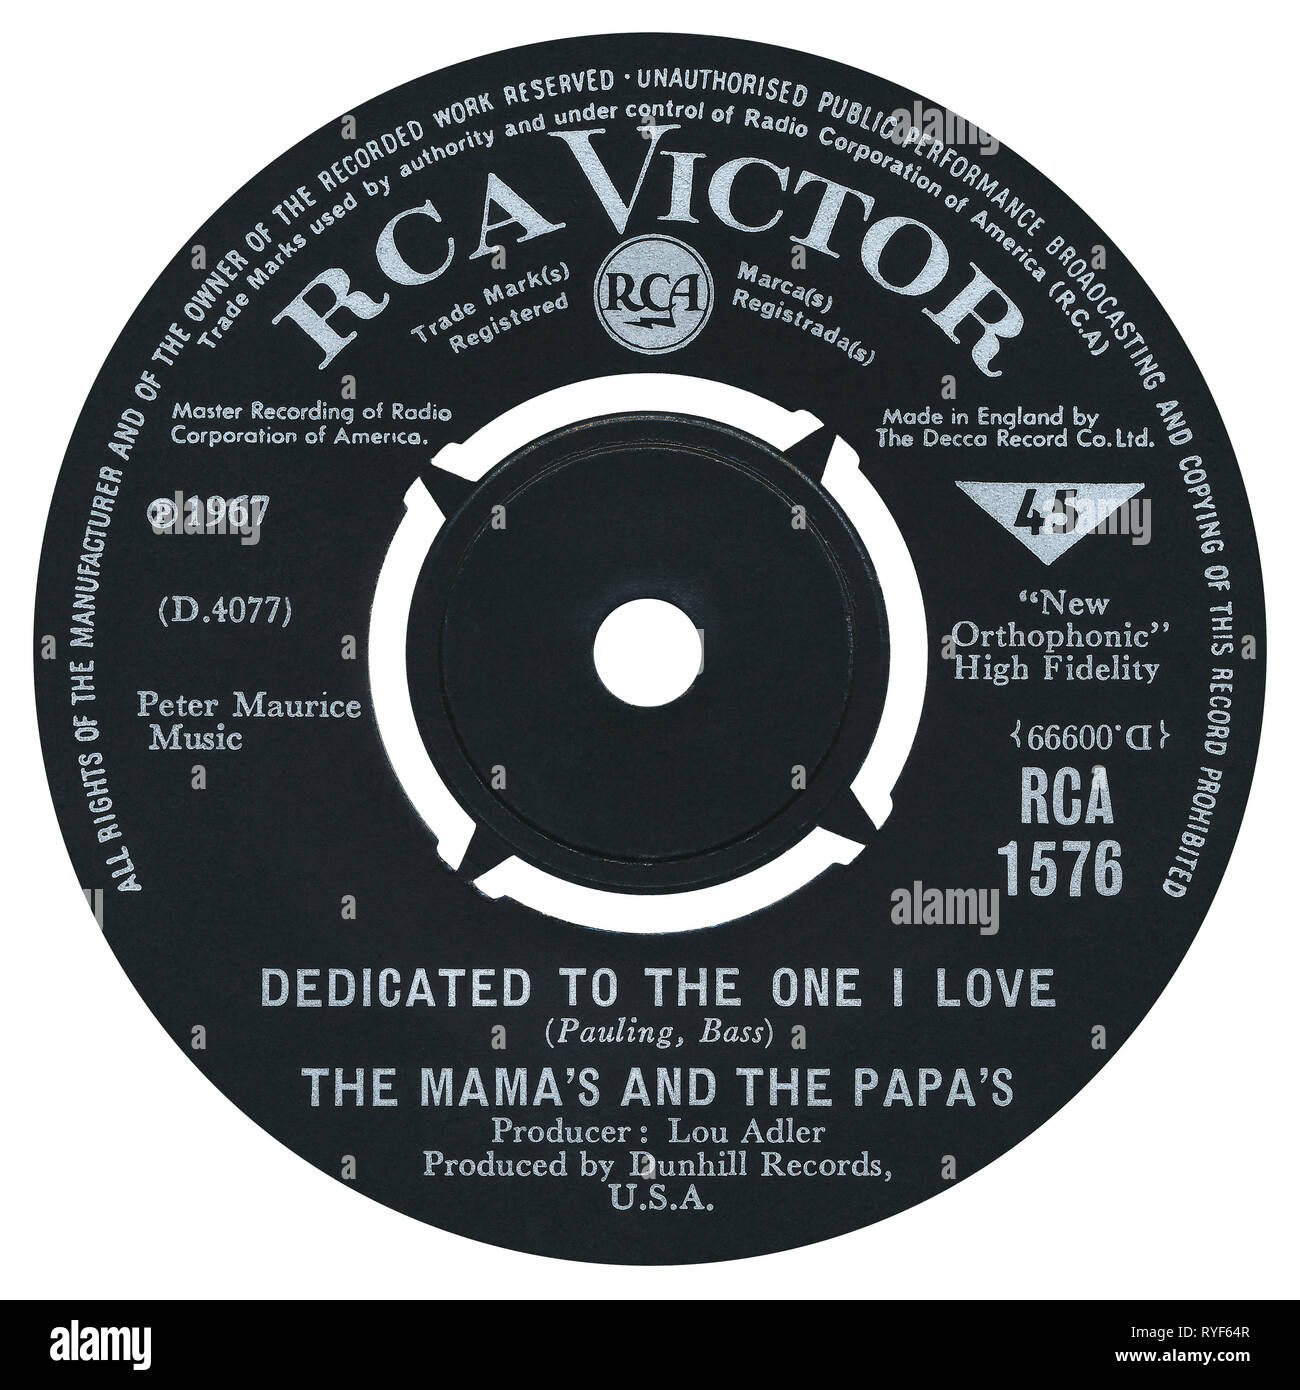 UK 45 rpm single of Dedicated To The One I Love by The Mamas And The Papas on the RCA Victor label from 1967. Written by Lowman Pauling and Ralph Bass and produced by Lou Adler. Stock Photo